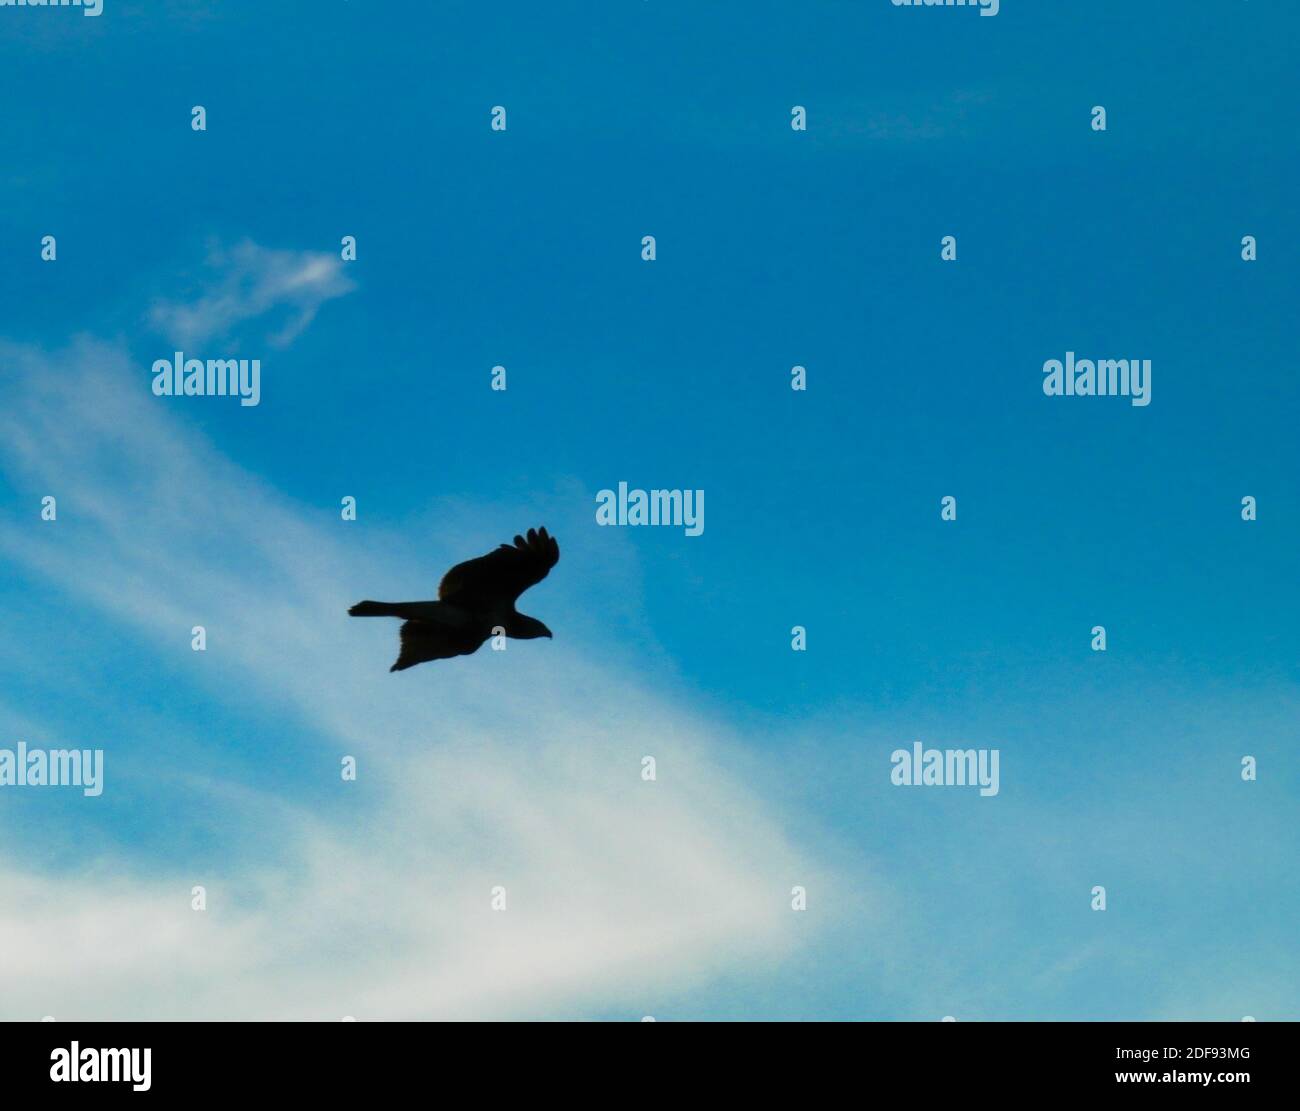 Silhouette of a Red-Tailed Hawk Bird of Prey Raptor as it Soars with a Full Wing Span Open Through the Bright Blue Sky with a Few Clouds Stock Photo